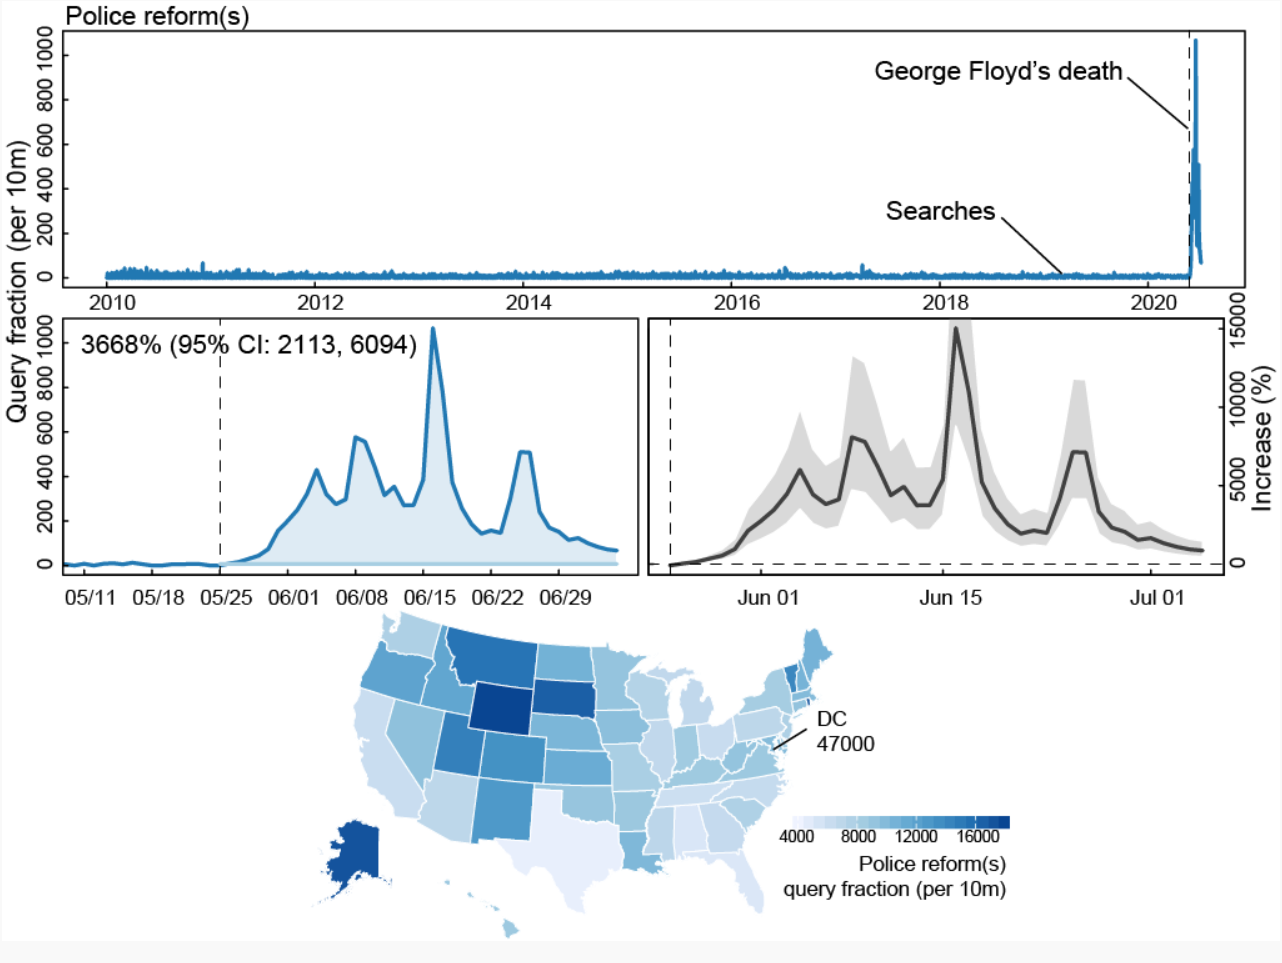 Charts showing Internet searches for "police" and "reform(s)" following the death of George Floyd